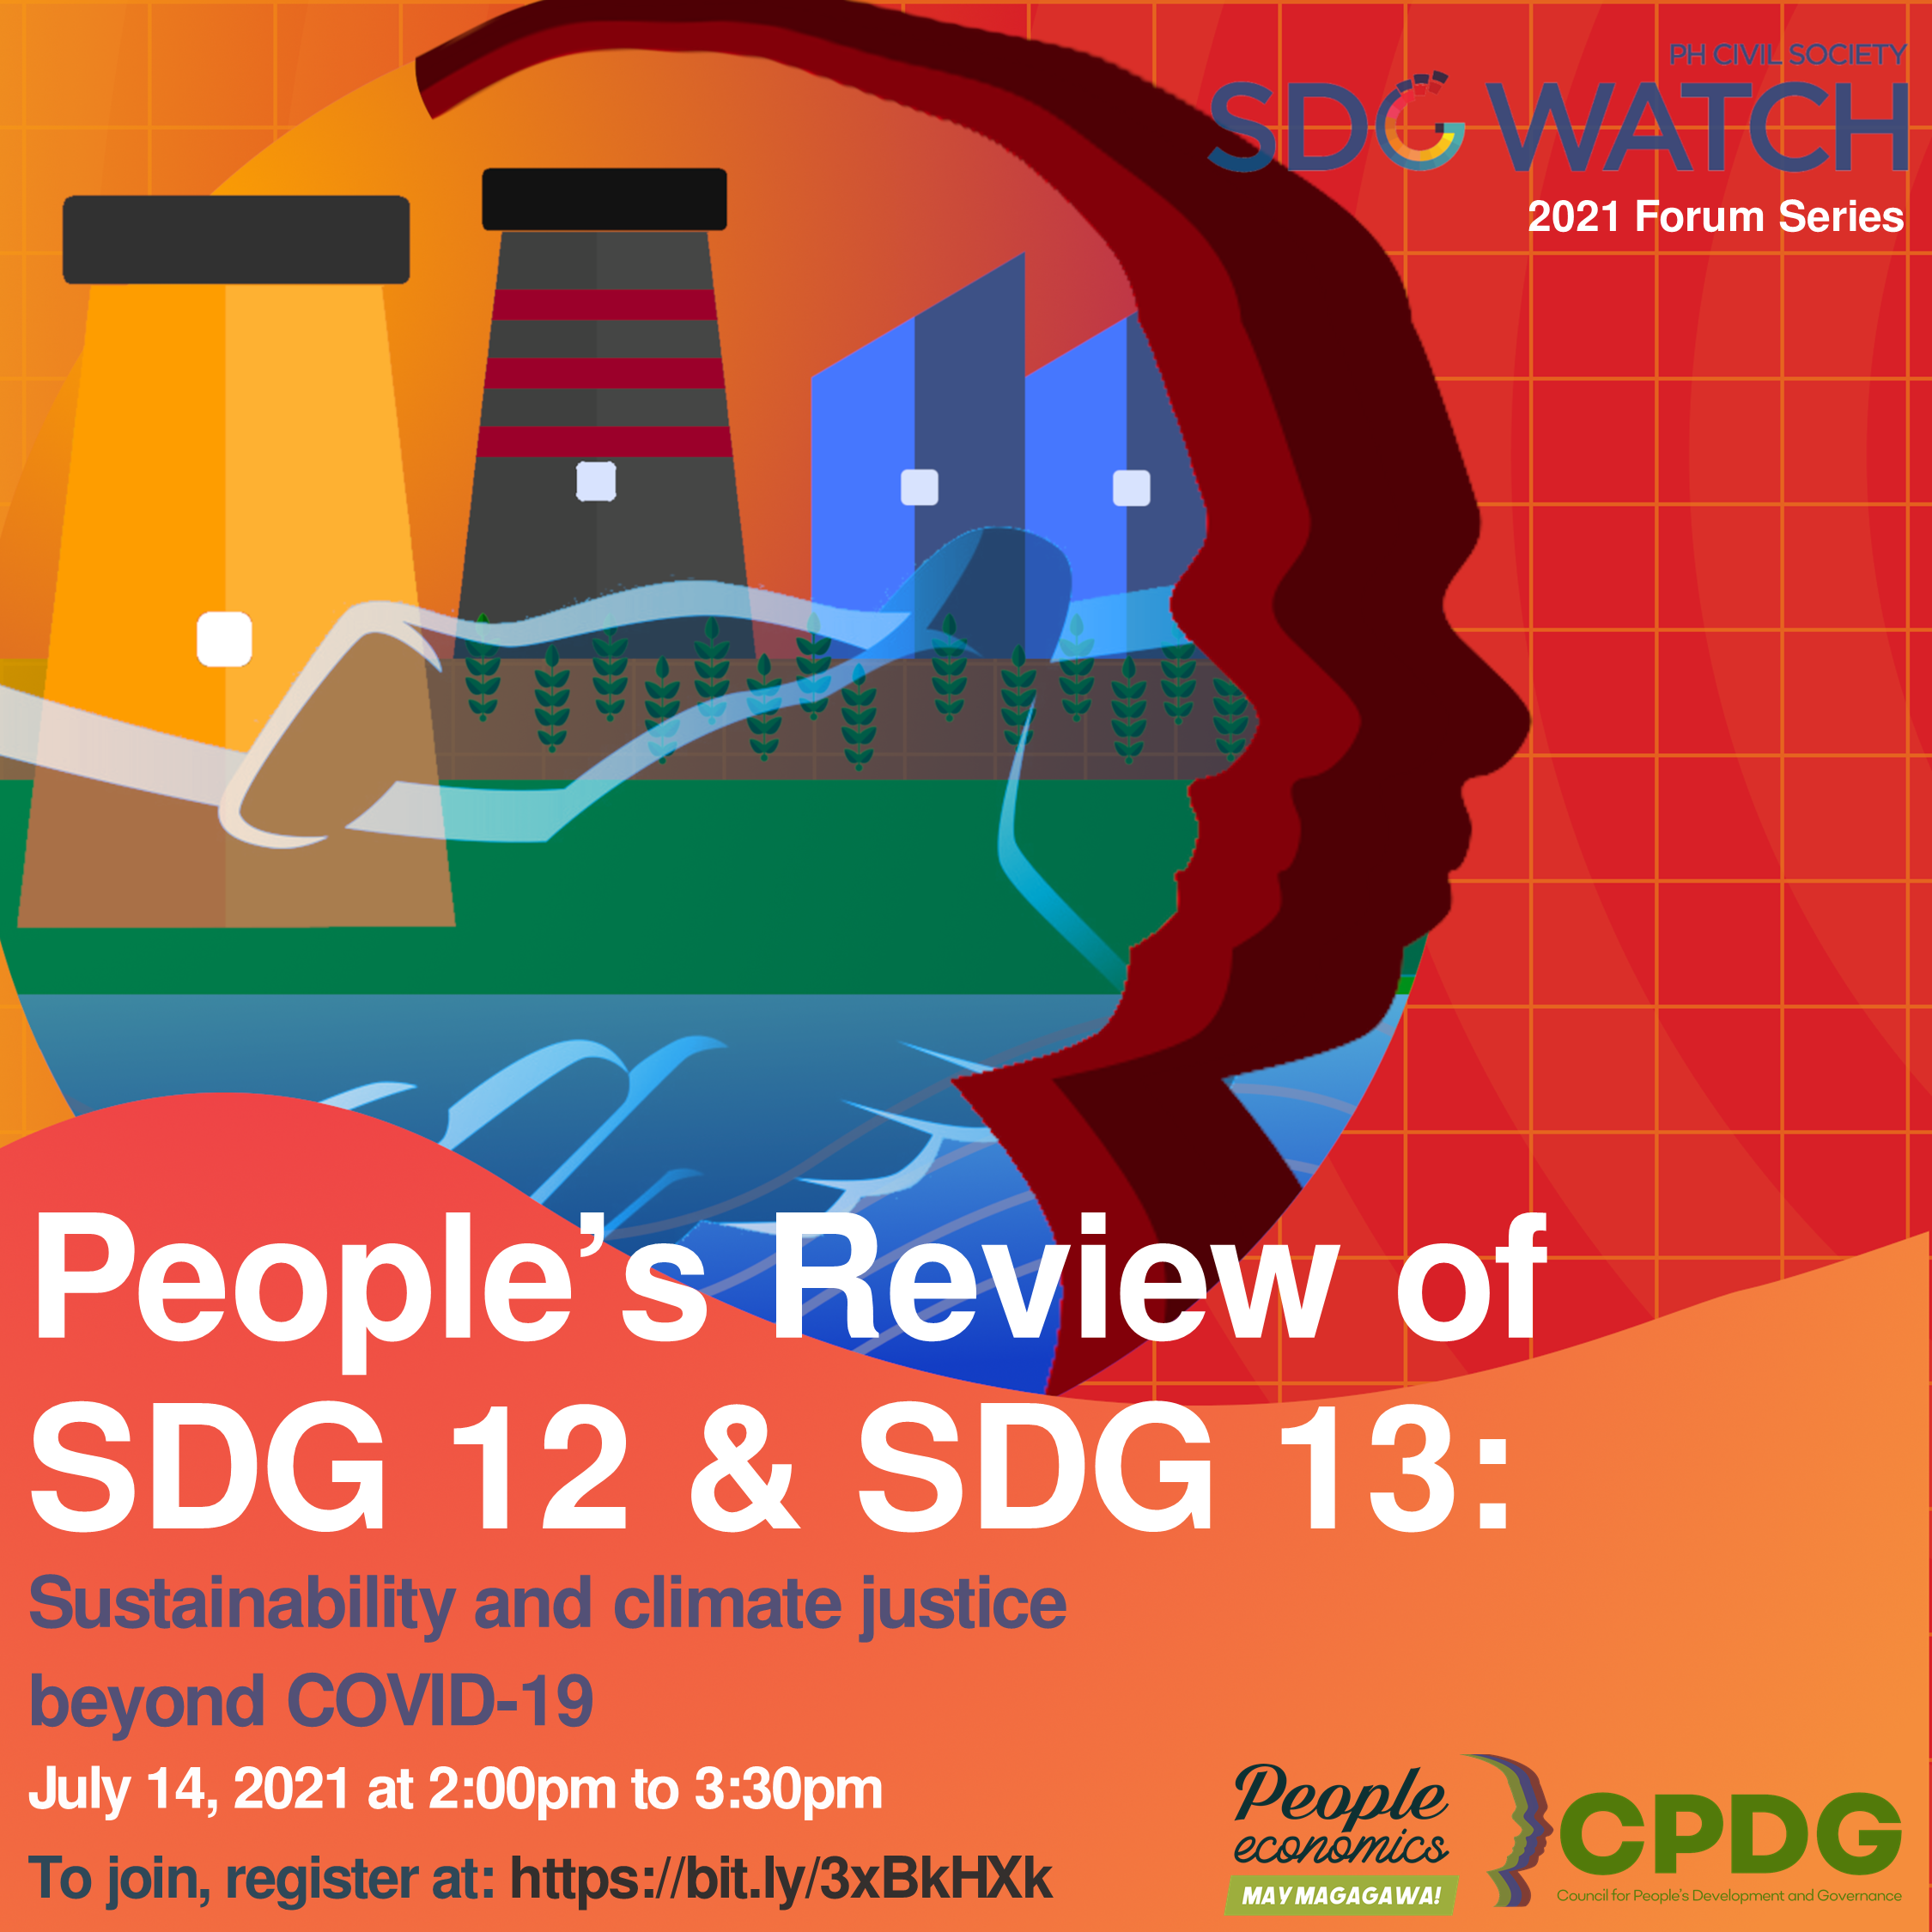 You are currently viewing People’s Review of SDG 12 & 13: Sustainability and climate justice beyond COVID-19